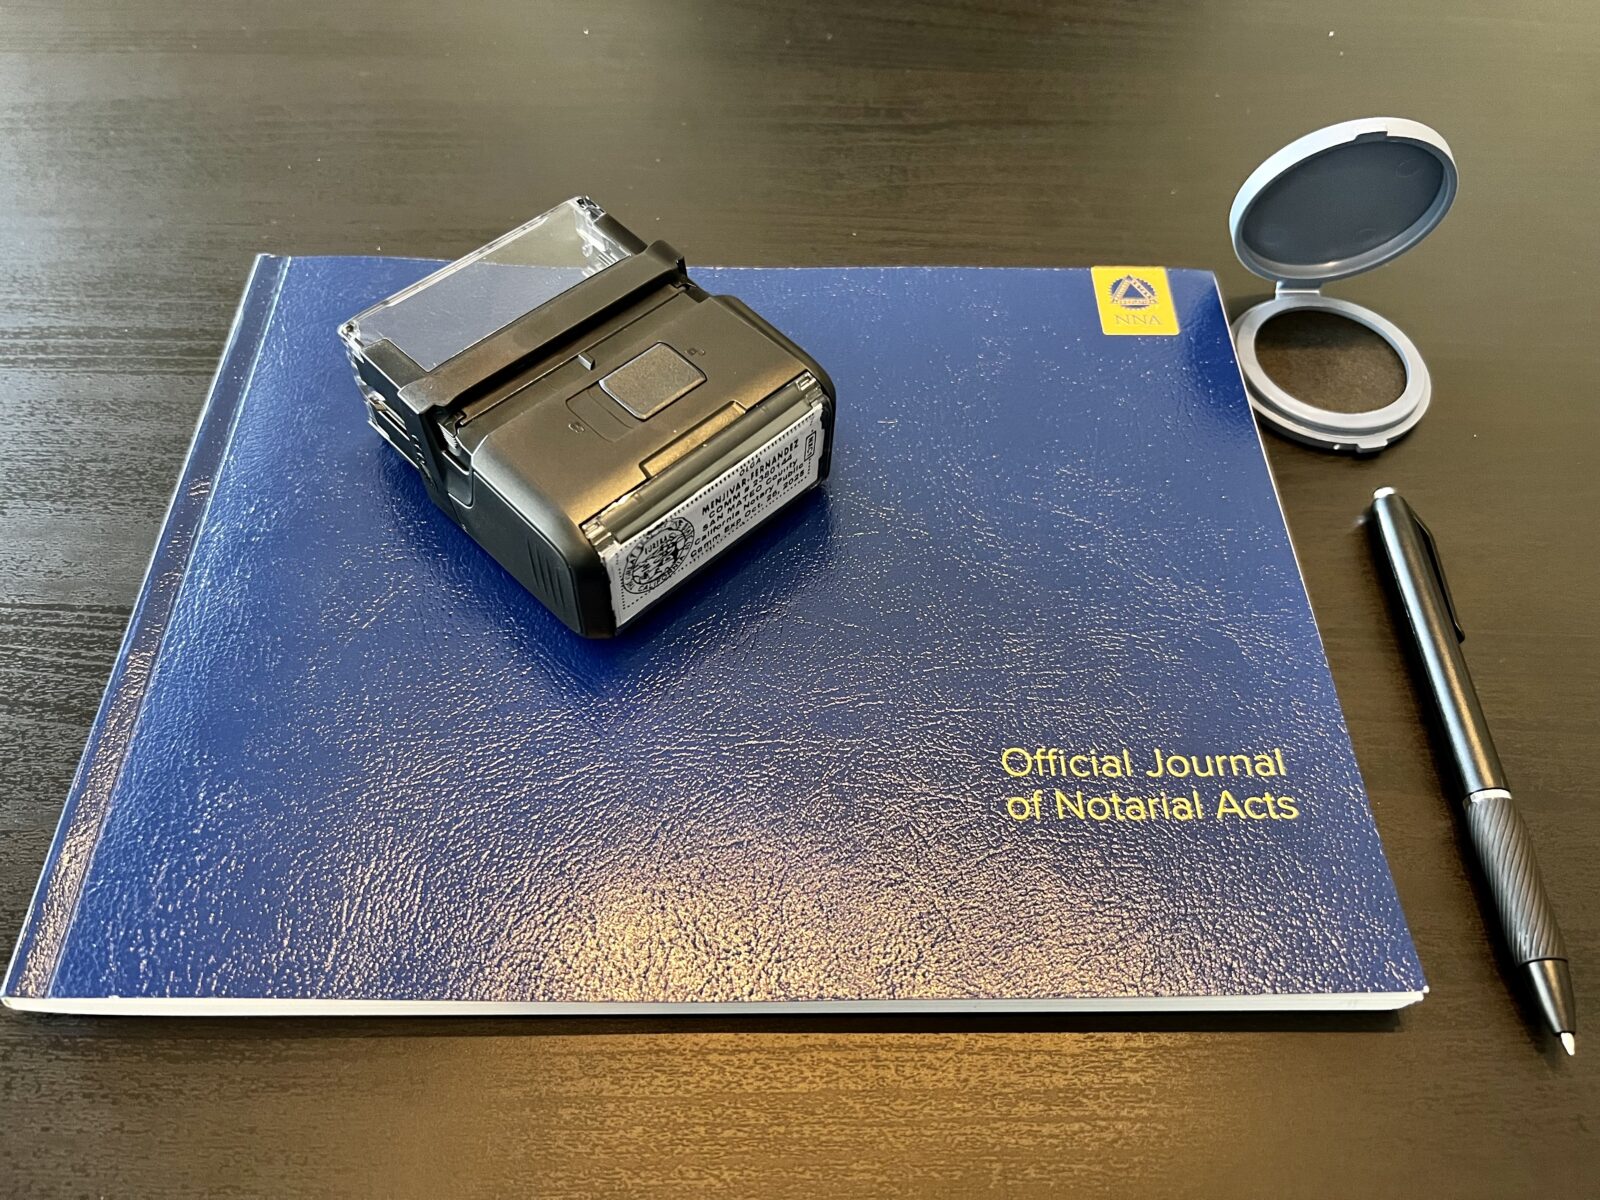 Official Journal of Notarial Acts Folder on a Desk